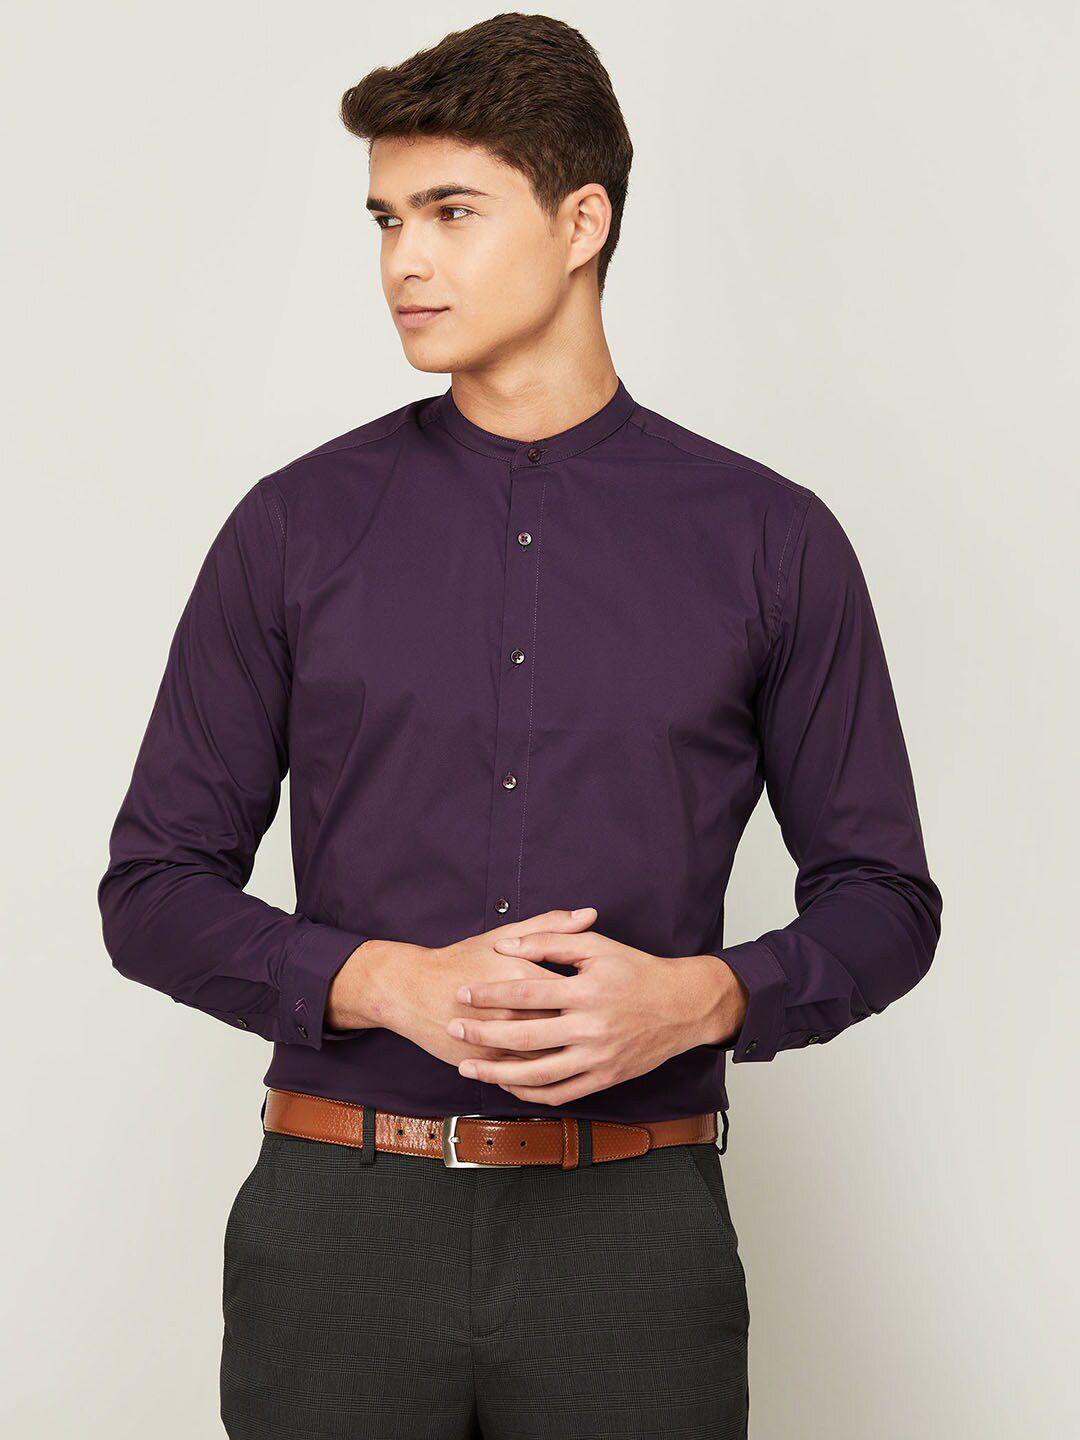 code by lifestyle men purple solid slim fit cotton casual shirt